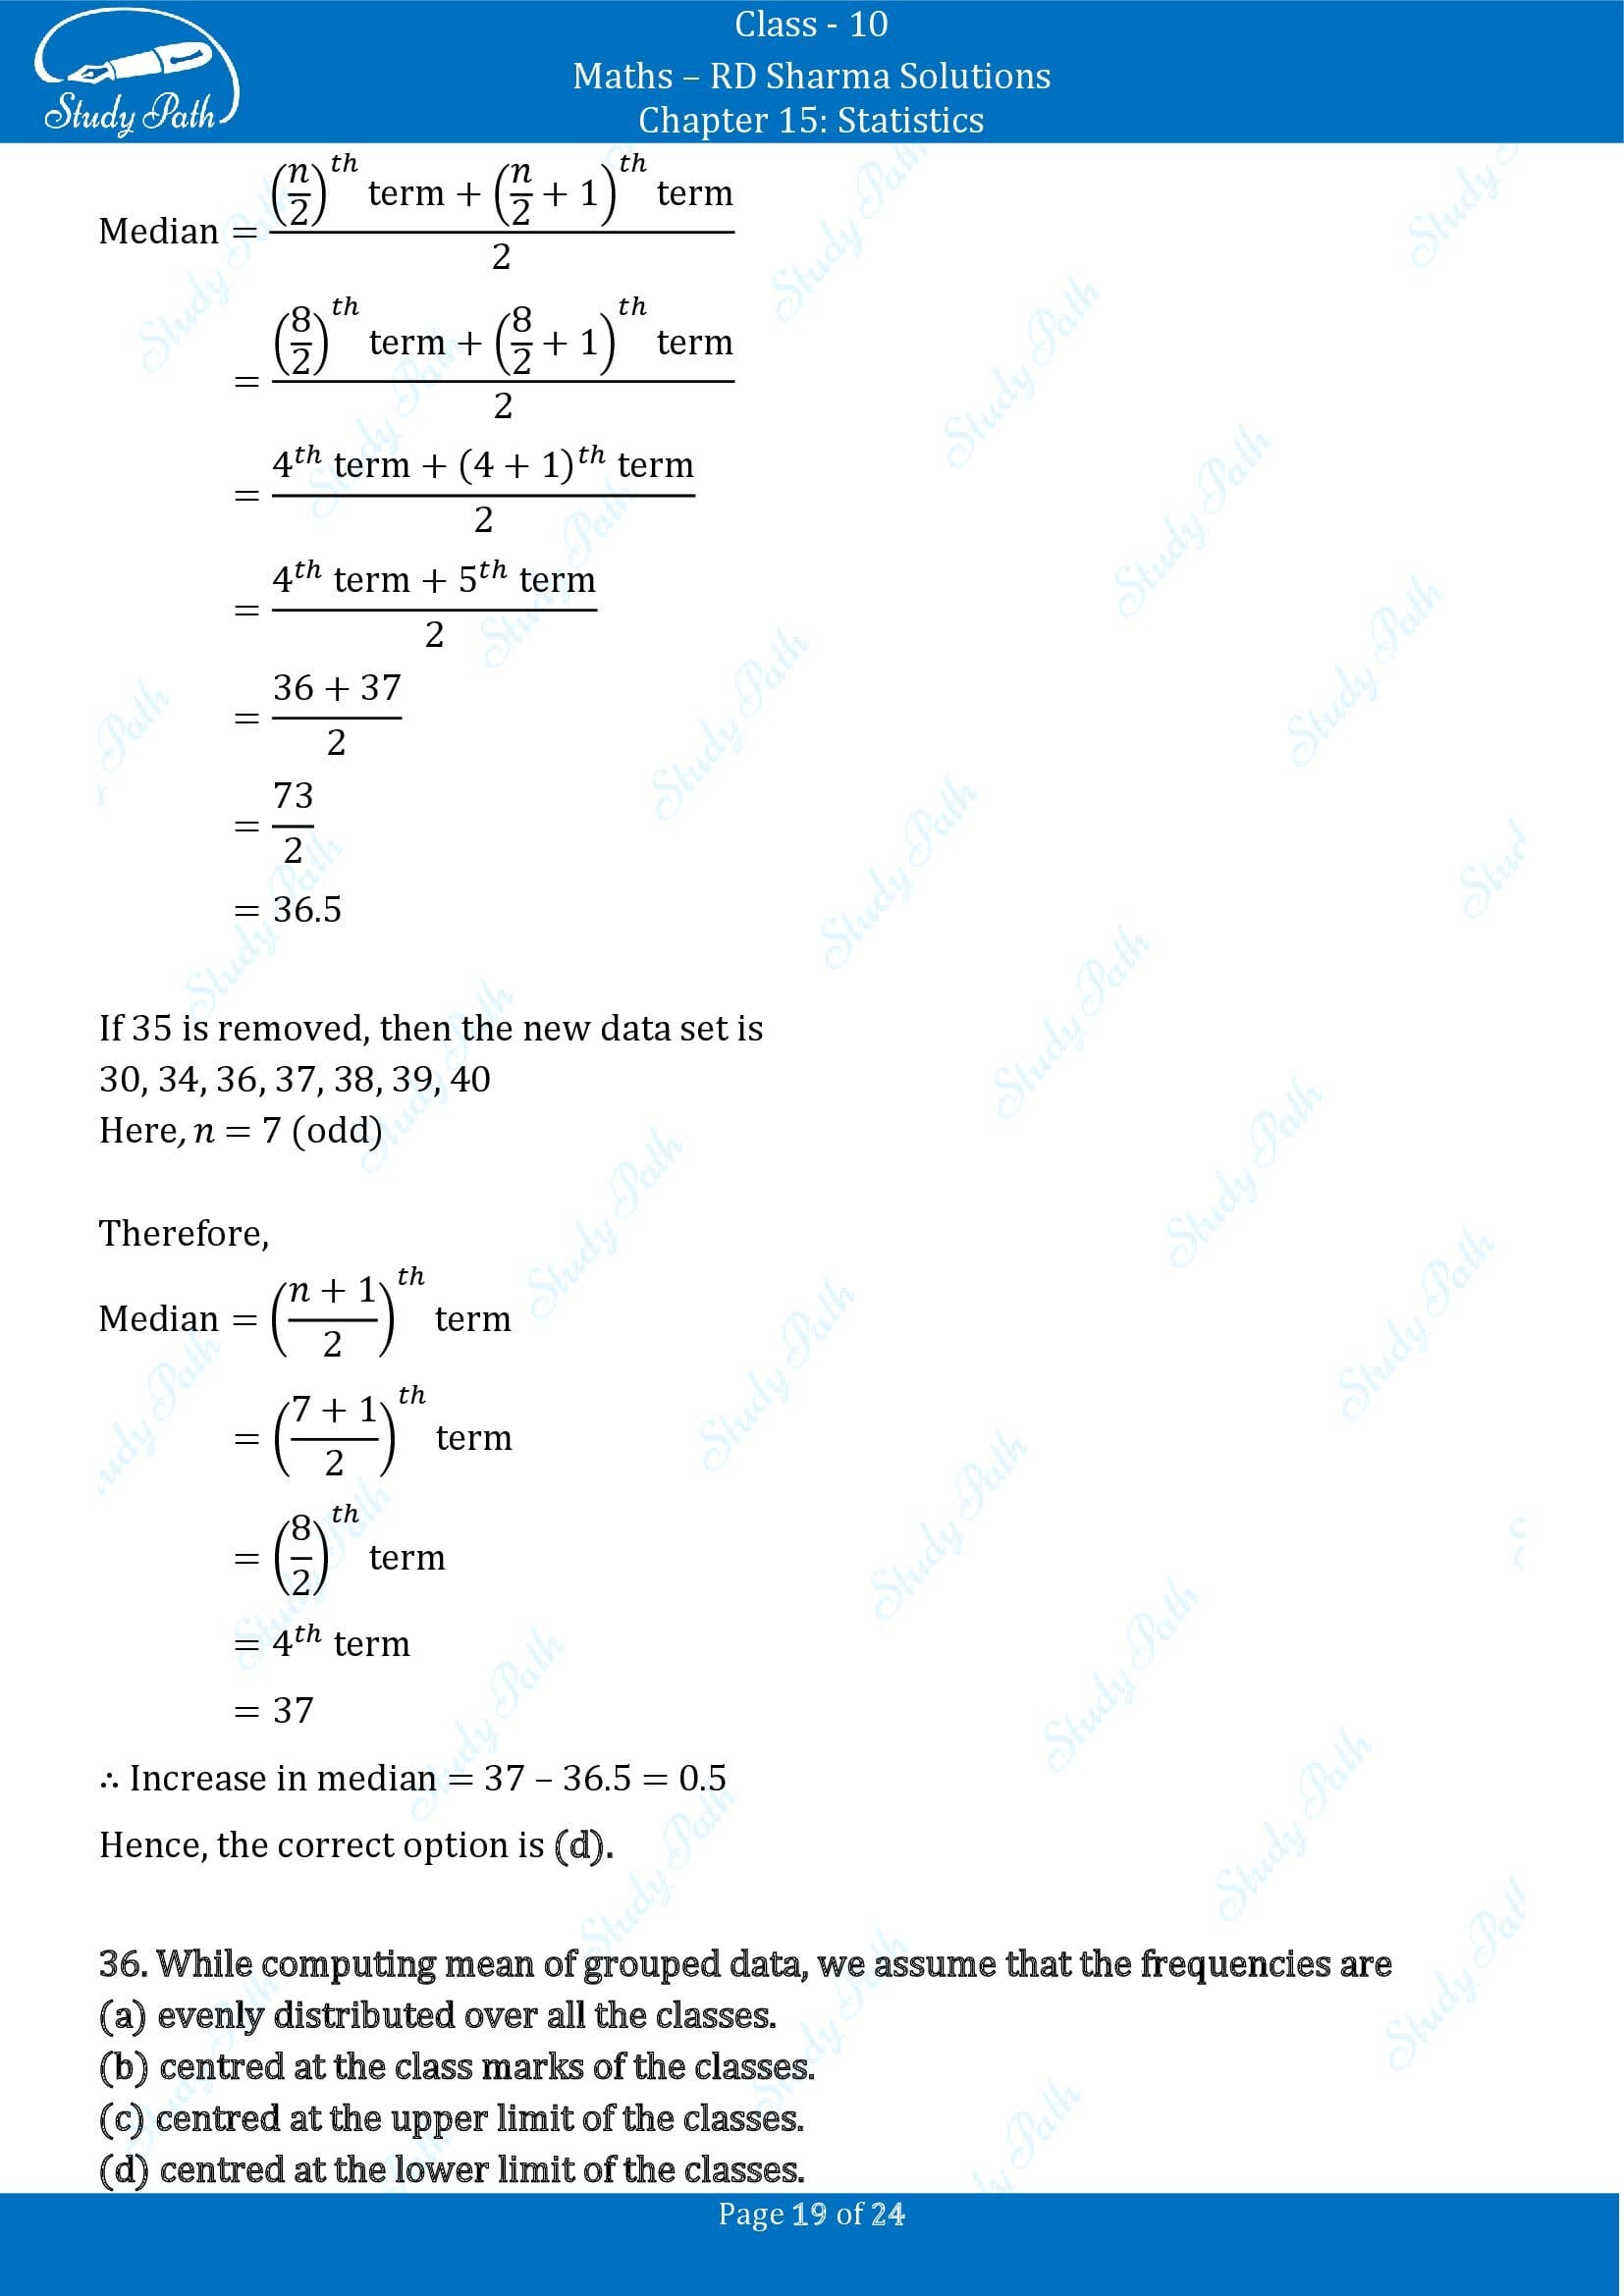 RD Sharma Solutions Class 10 Chapter 15 Statistics Multiple Choice Question MCQs 00019